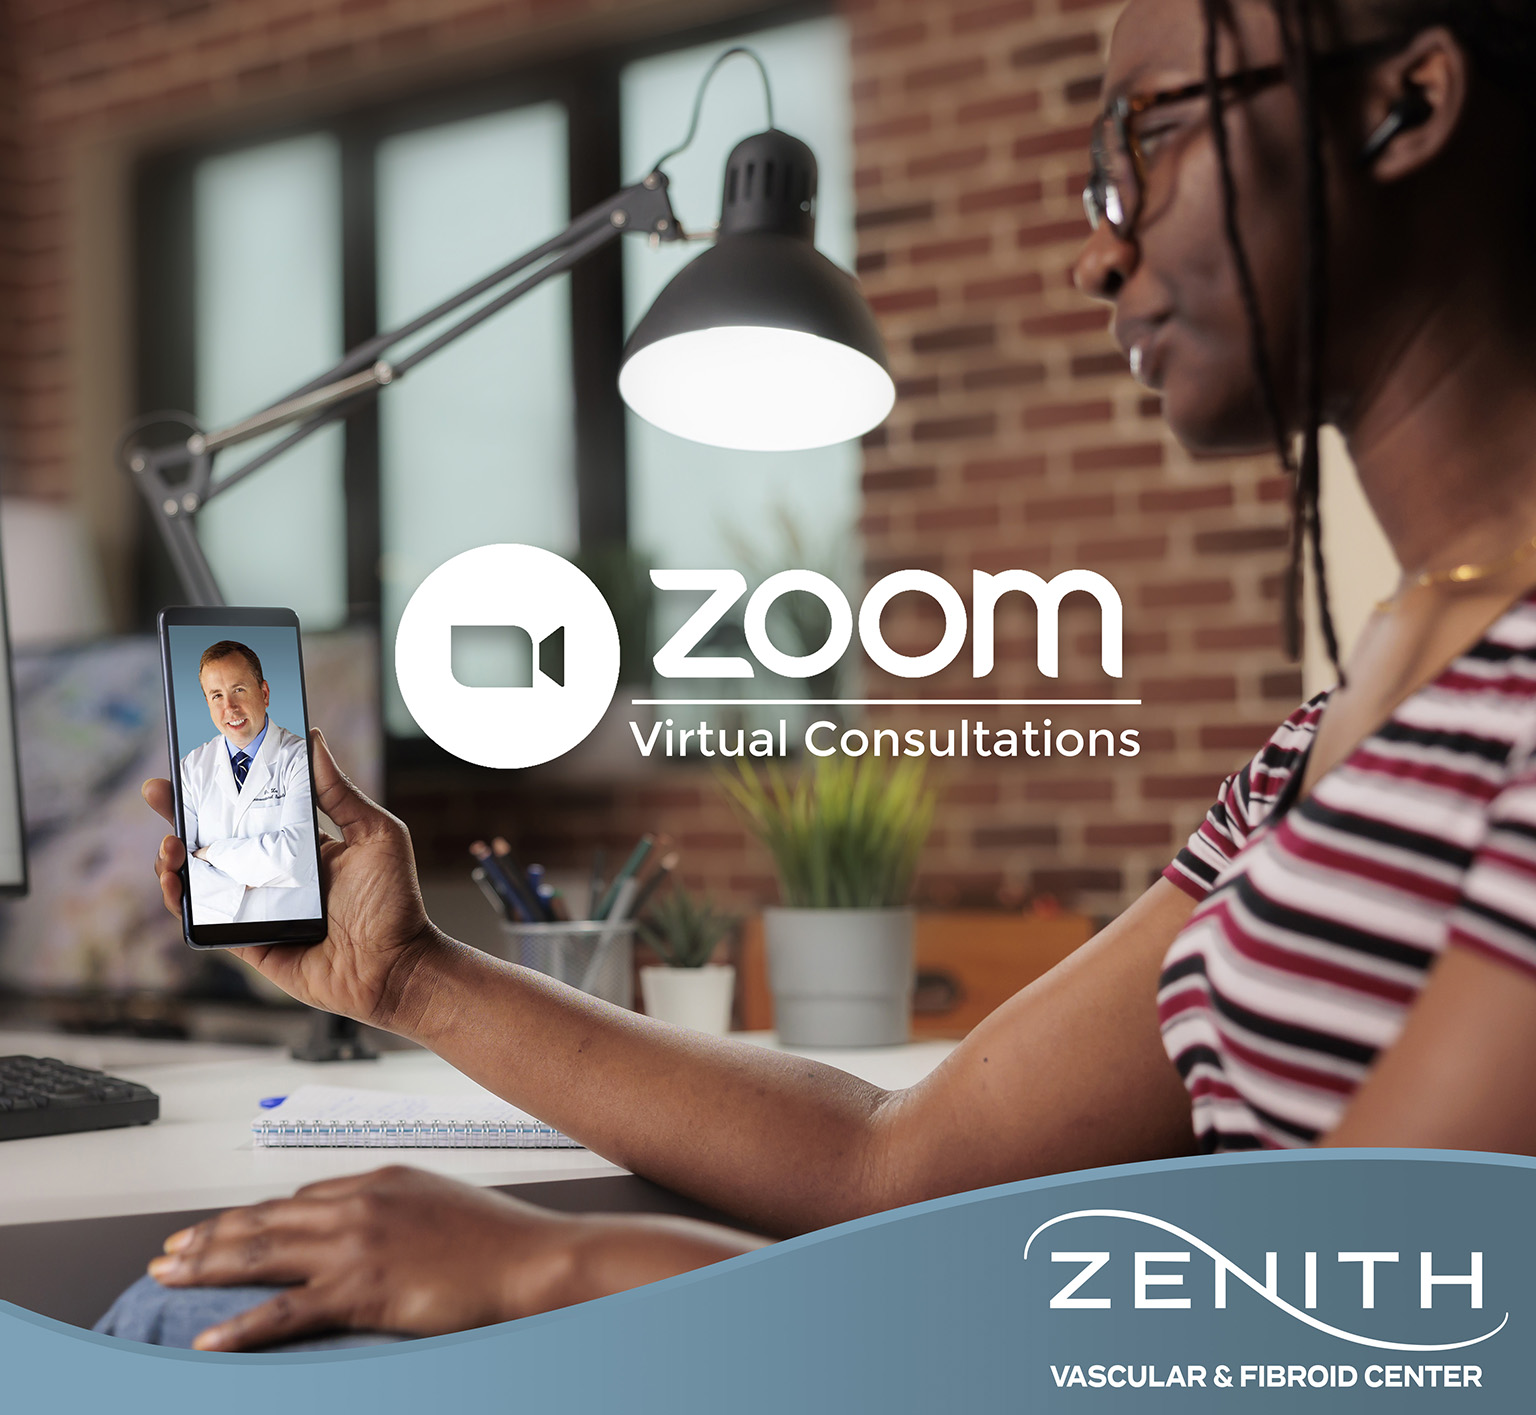 zoom virtual consultation appointments with dr zeni at zenith vascular and fibroid center